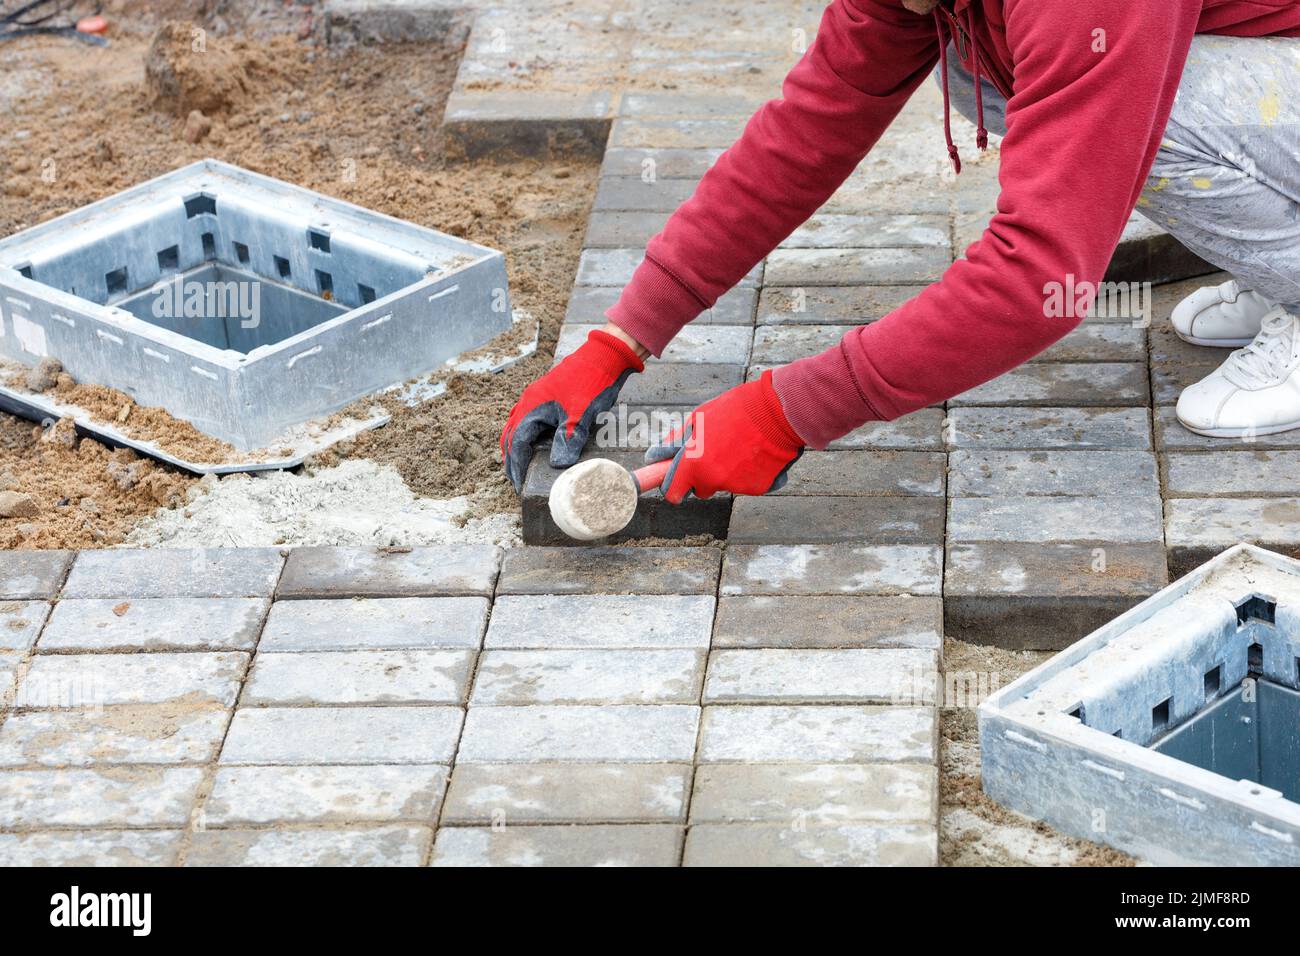 Paving slabs. A worker in red gloves is laying paving slabs around storm sewer hatches with a rubber mallet. Copy space. Stock Photo